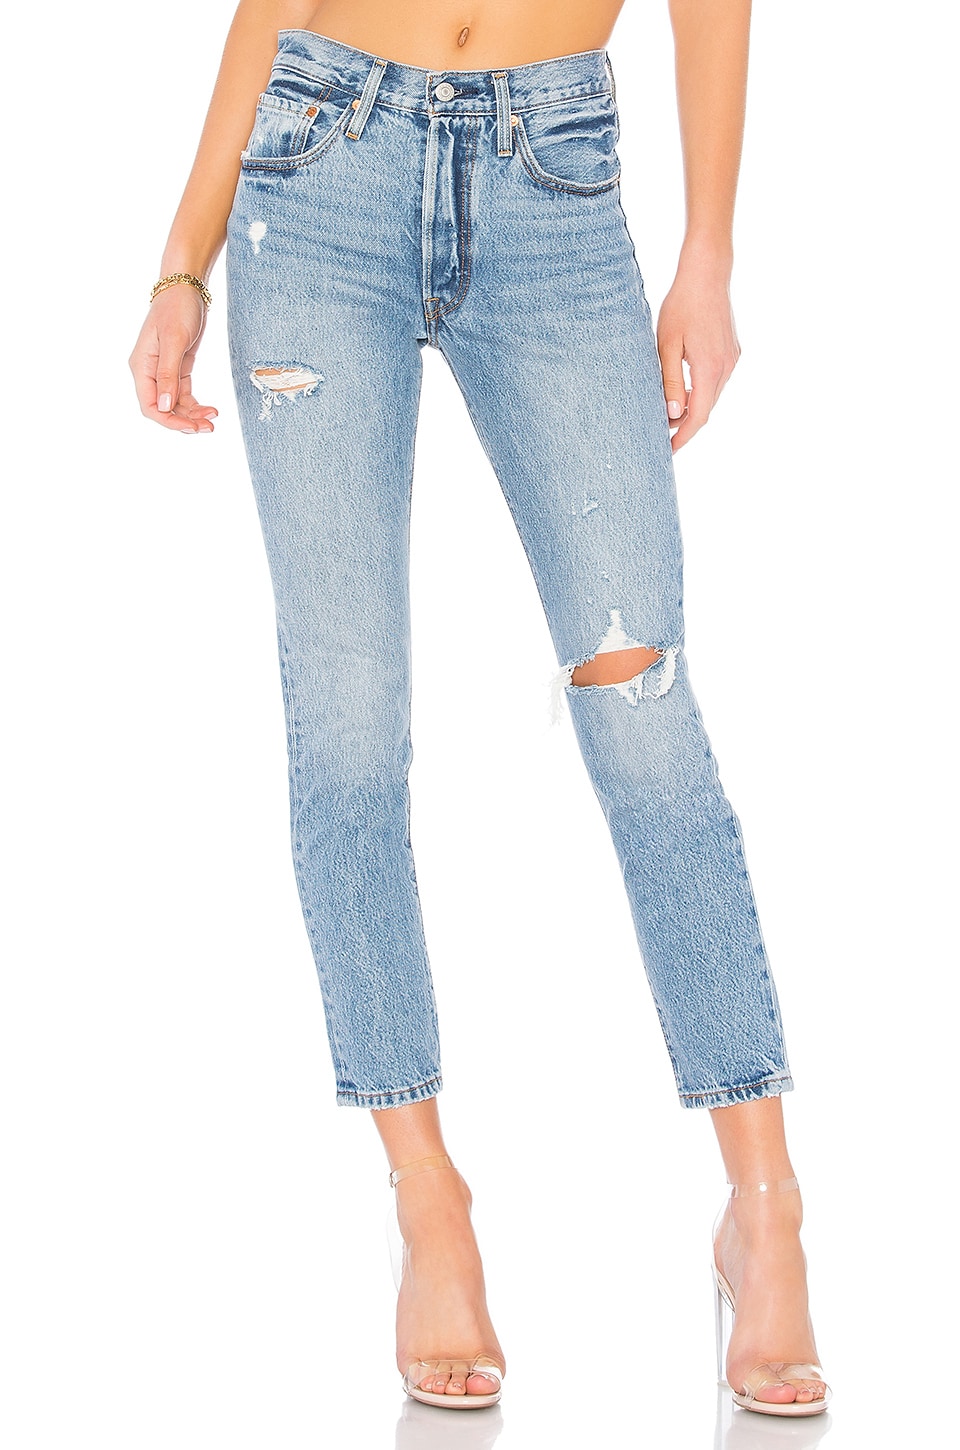 LEVI'S 501 Skinny in Can't Touch This |